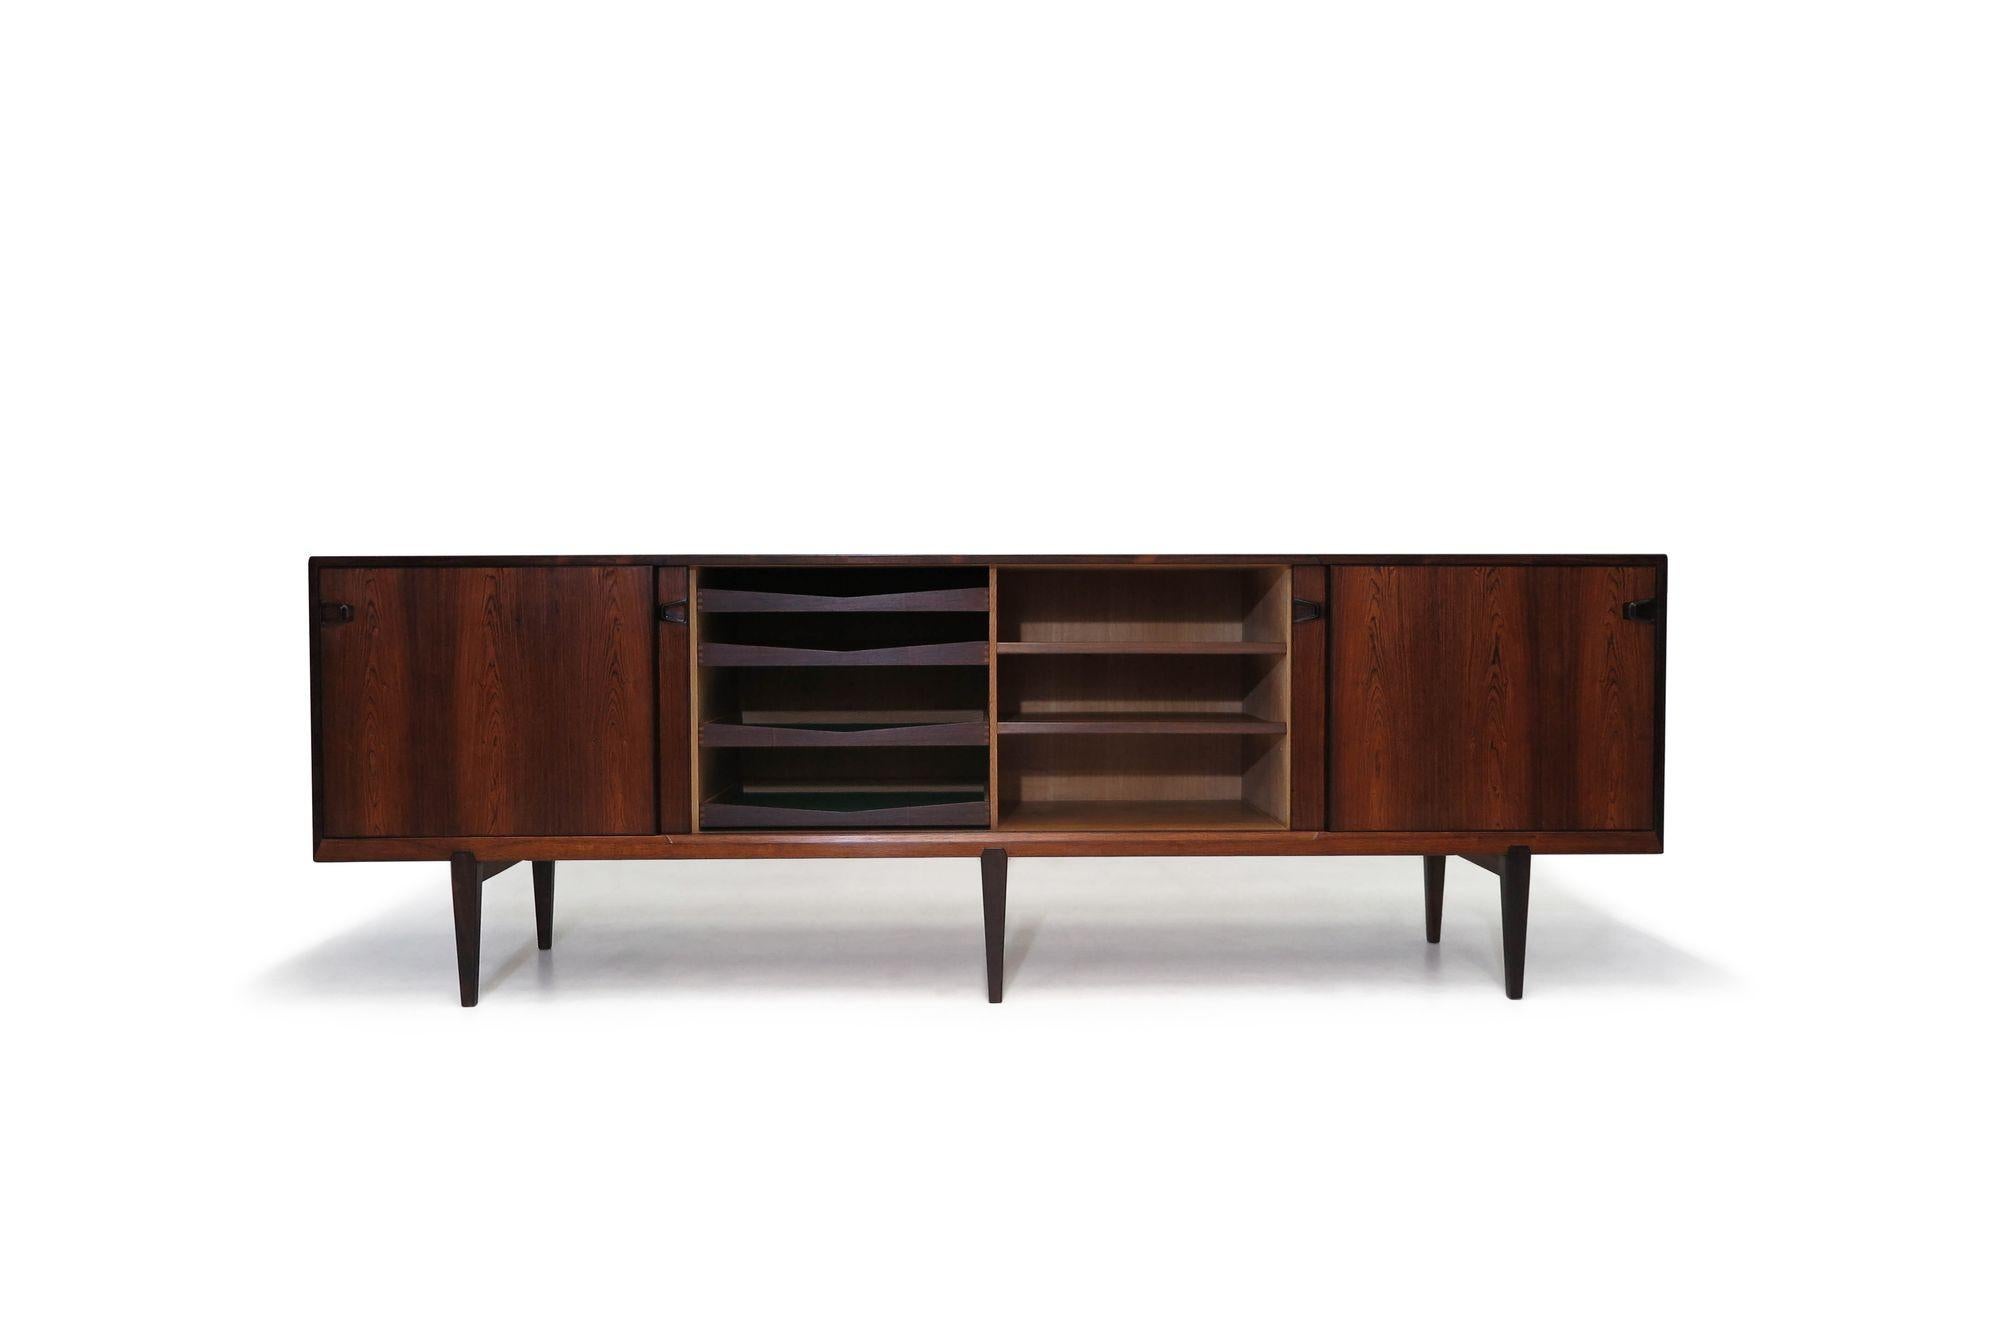 Danish Credenza designed by Henry Rosengren Hansen for Brande Moblefabrik, Denmark c.1955. This beautiful 97” long credenza is expertly hand-crafted from Brazilian rosewood, showcases fine joinery and the timeless sophistication of Danish furniture